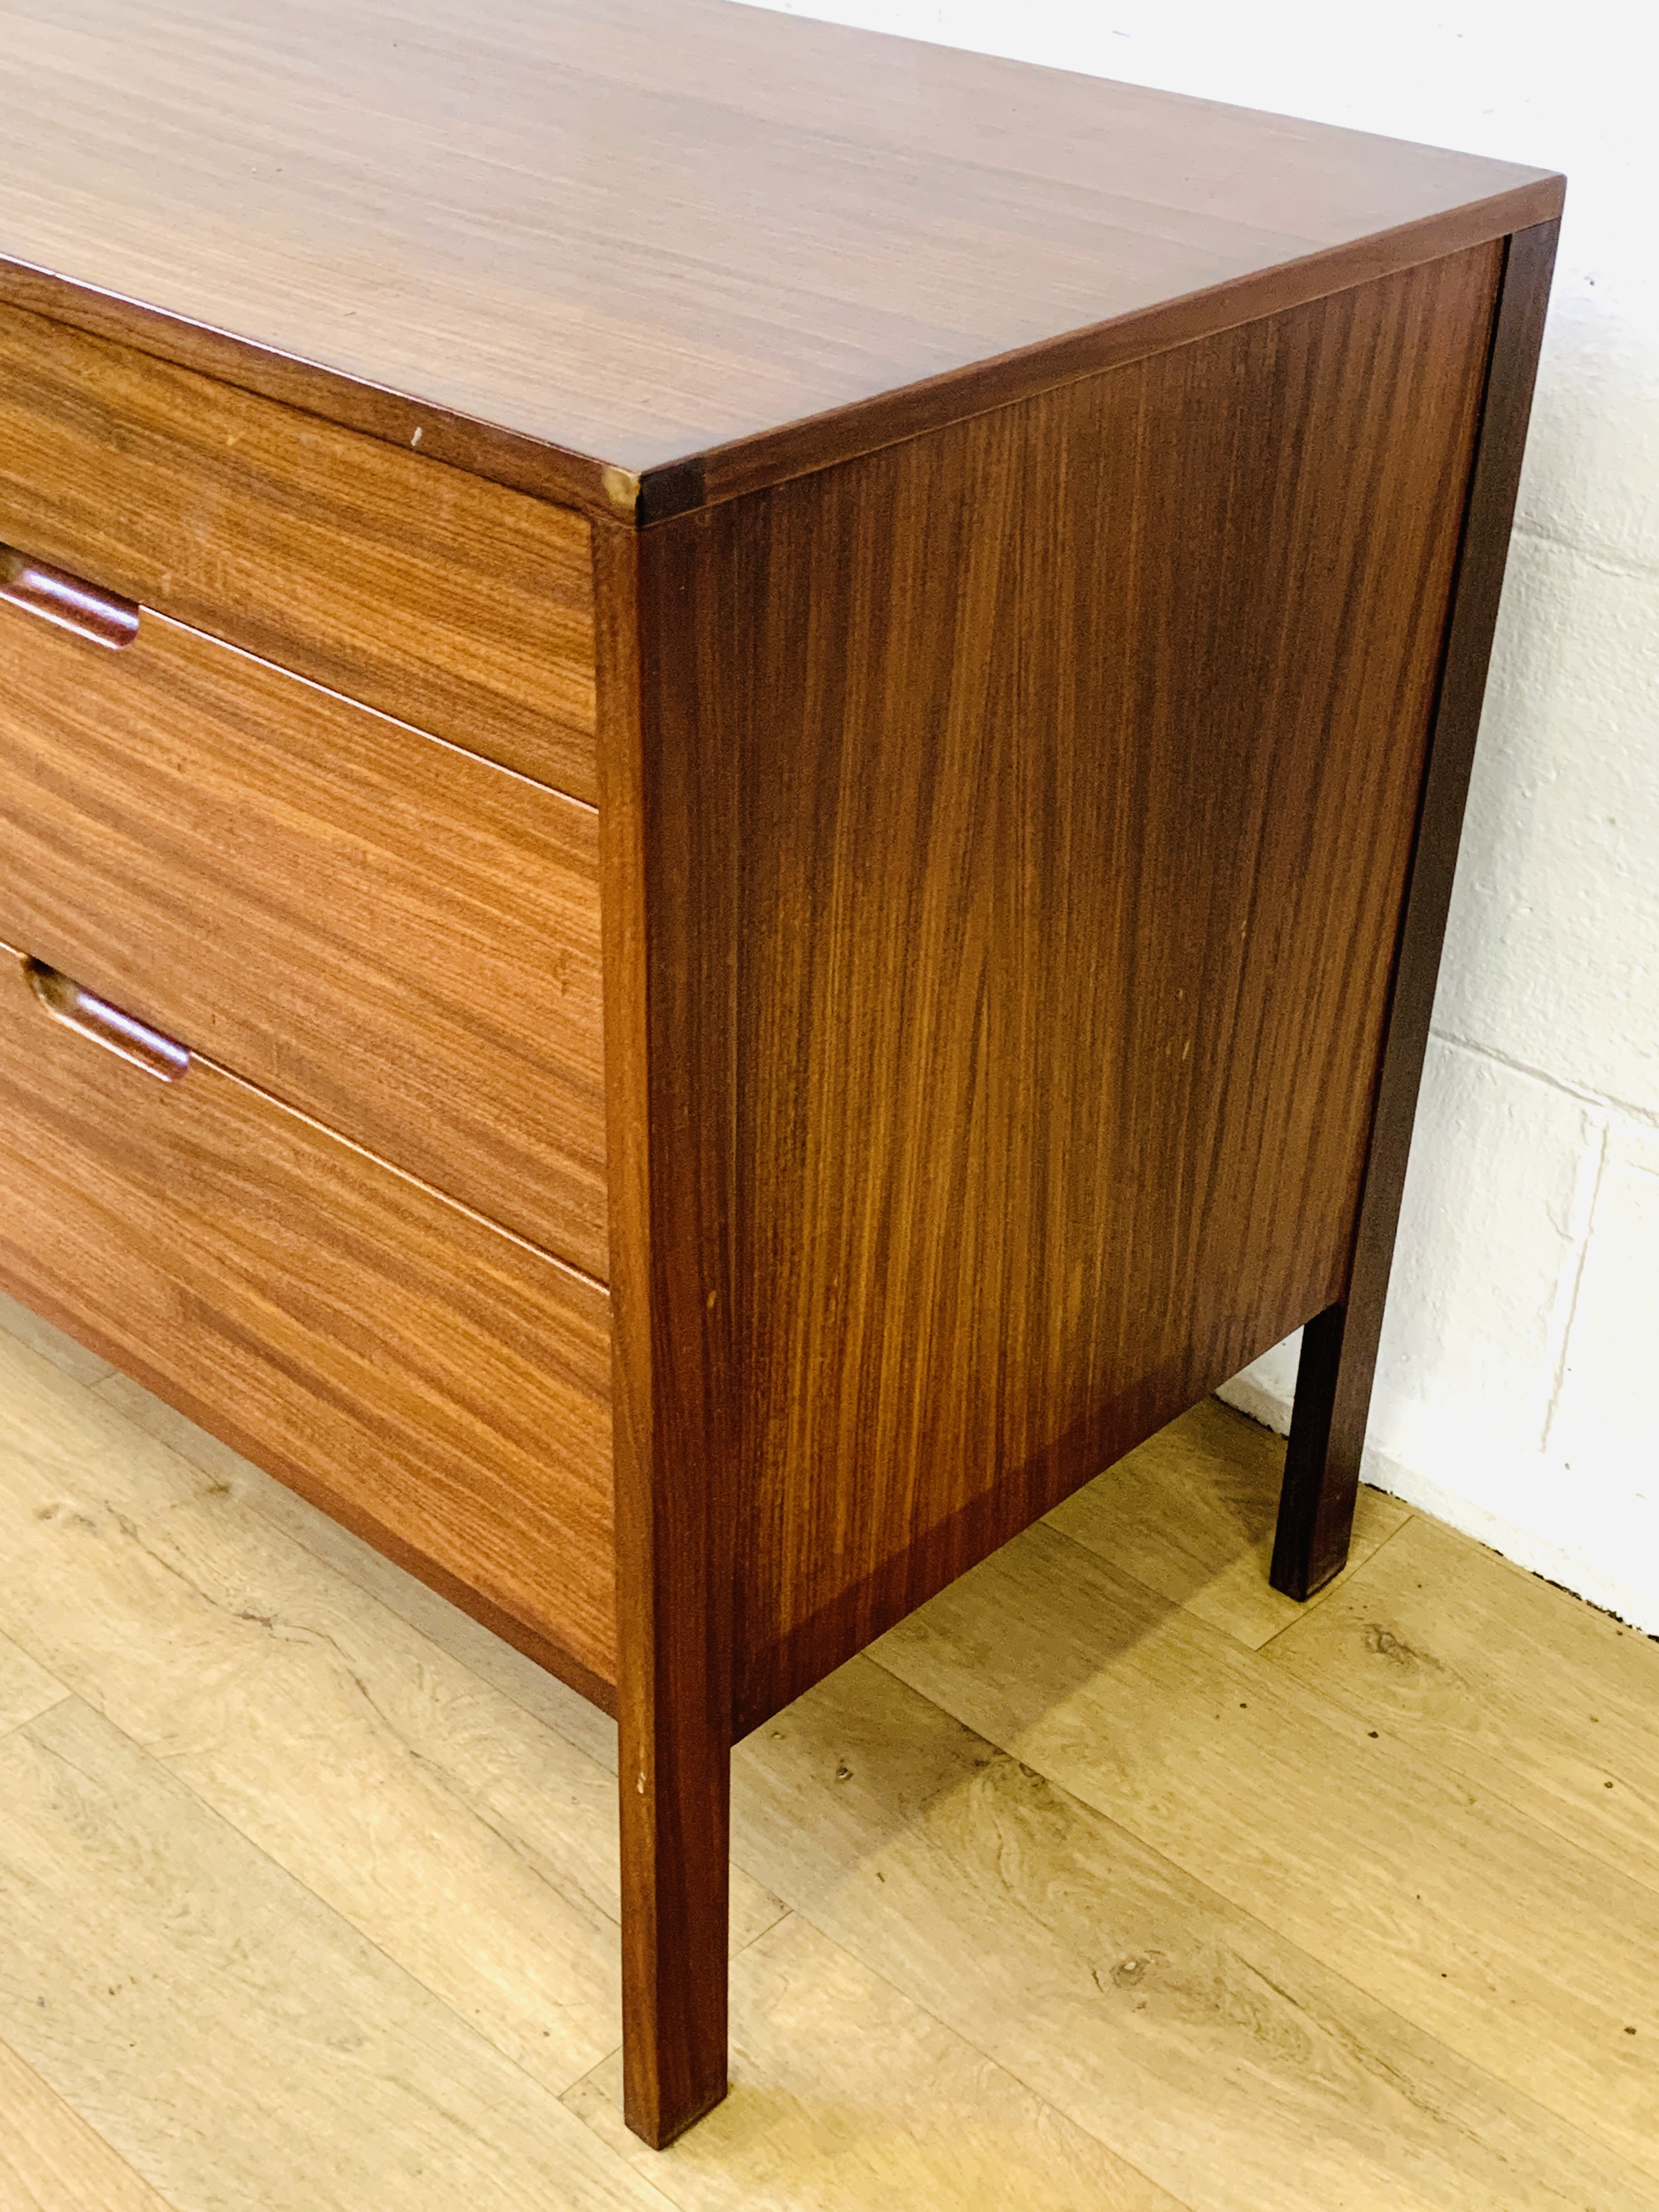 Teak chest of drawers - Image 6 of 7